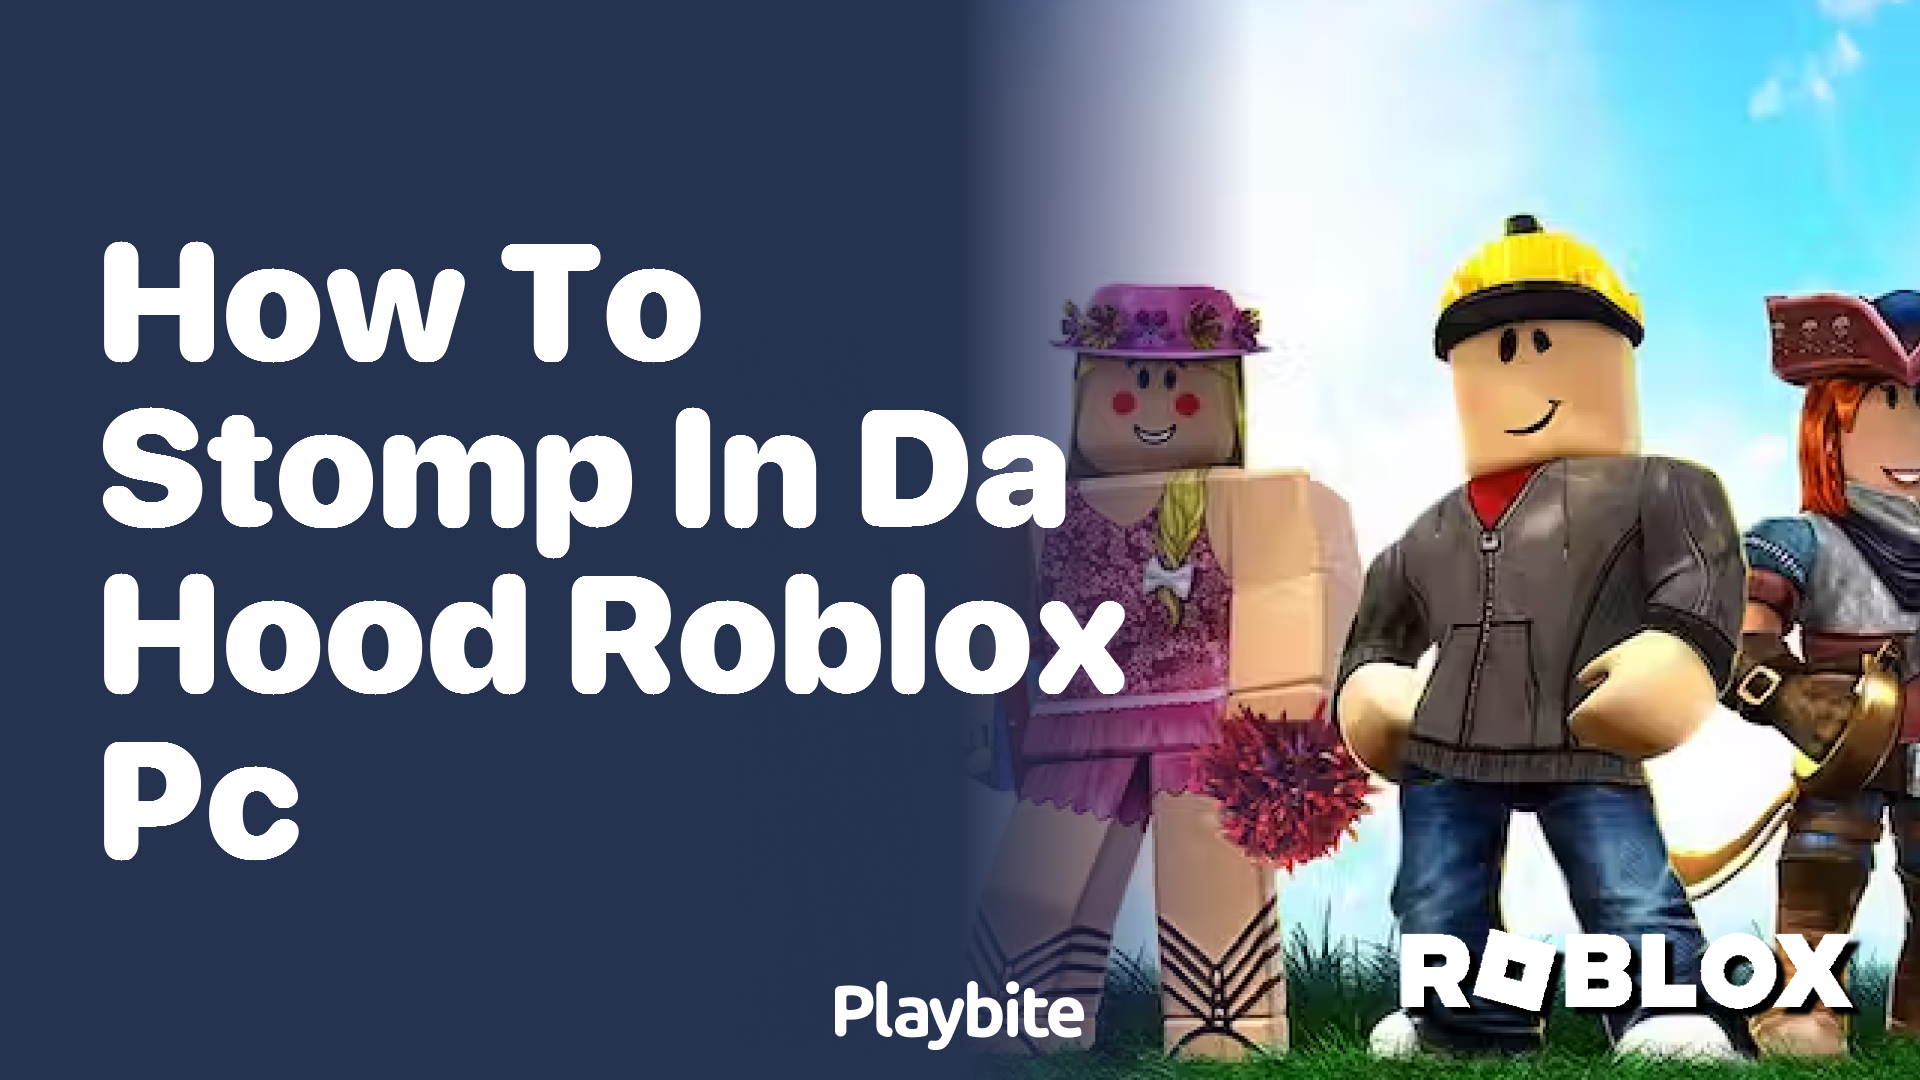 How to Stomp in Da Hood on Roblox PC